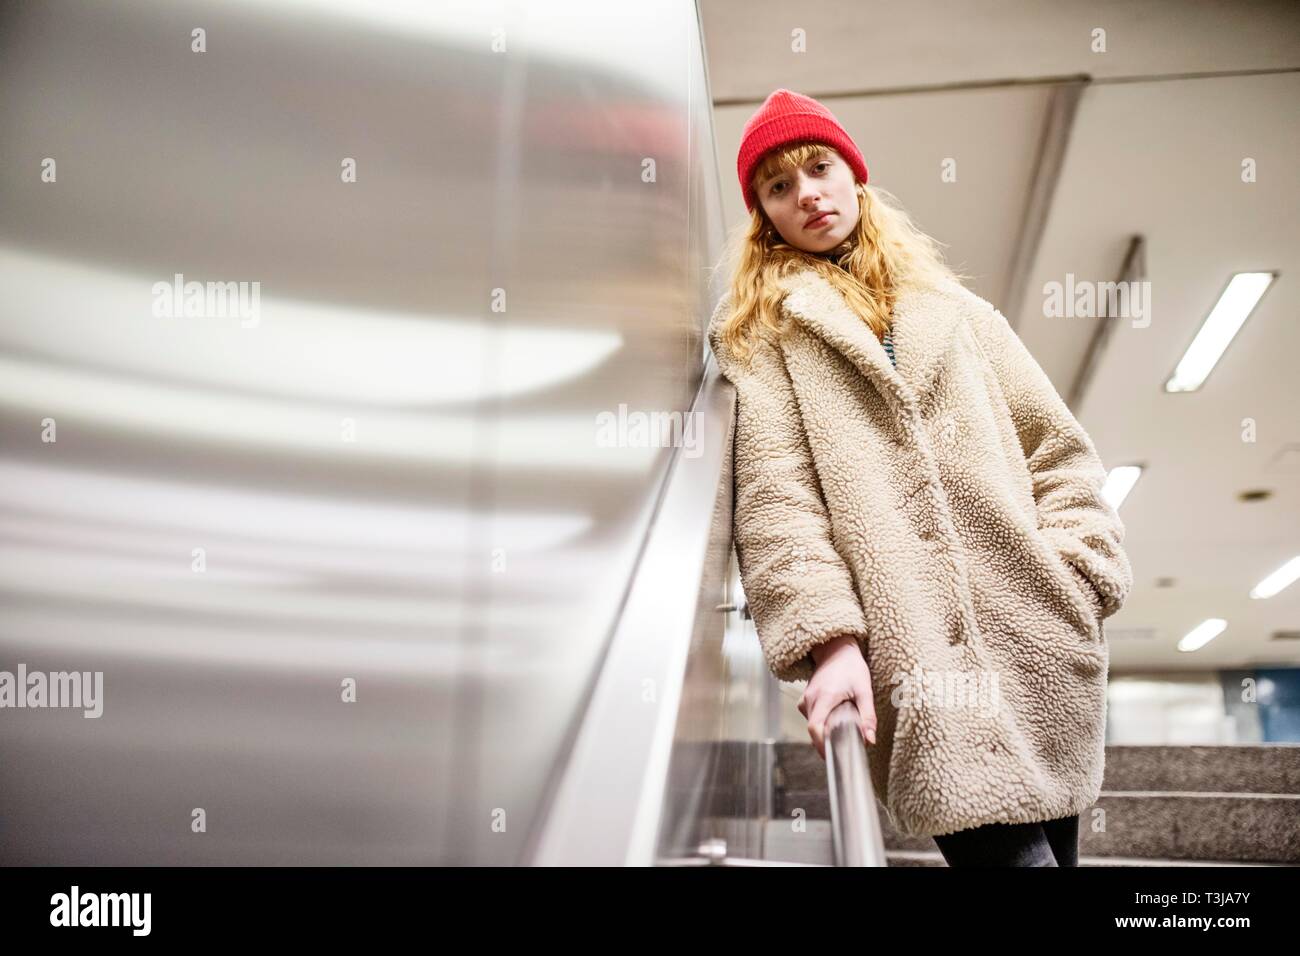 Girl, teenager, standing at the stairs of a subway station, Cologne, North Rhine-Westphalia, Germany Stock Photo